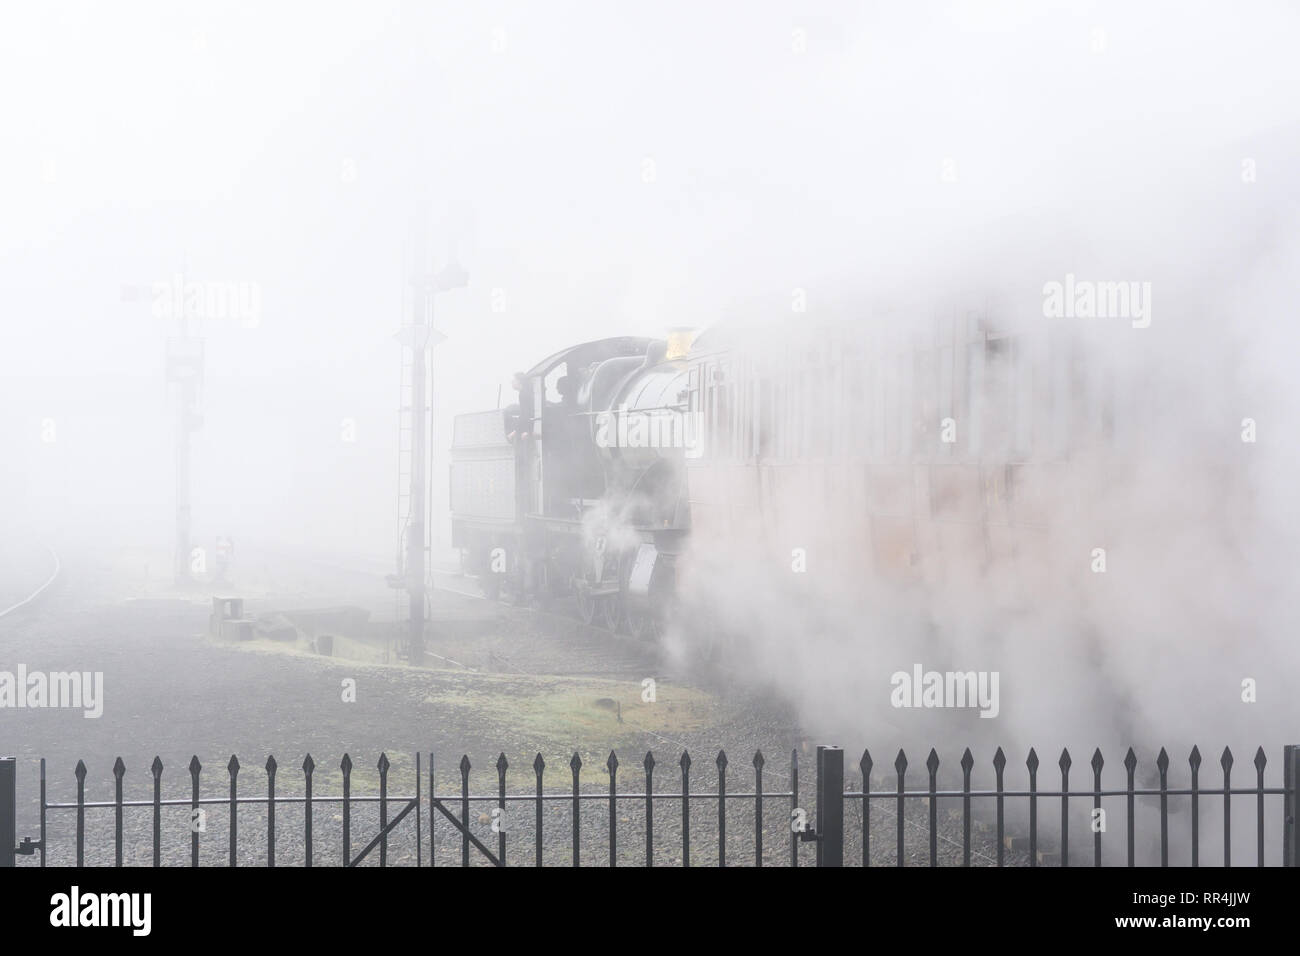 Kidderminster, UK. 24th February, 2019. UK weather: despite the thick morning fog across Worcestershire, nothing dampens the spirit of the dedicated volunteers at Severn Valley Railway. The misty morning provides an atmospheric, picturesque start for the departure of today's first vintage steam train. Credit: Lee Hudson/Alamy Live News Stock Photo